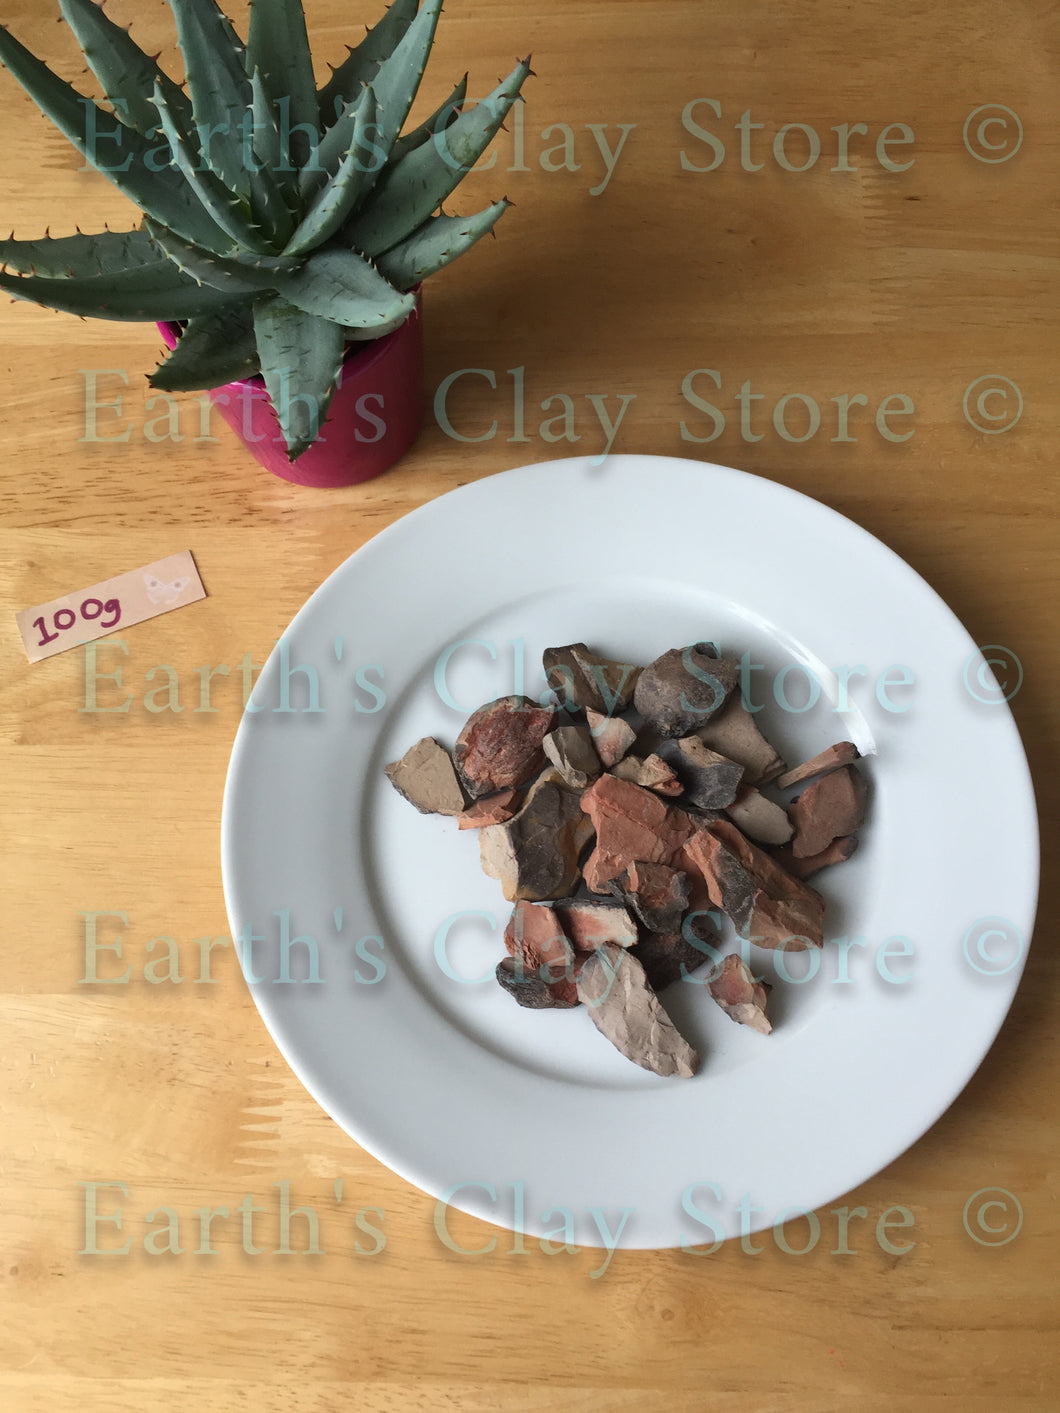 SA Red Soft Clay – Earth's Clay Store